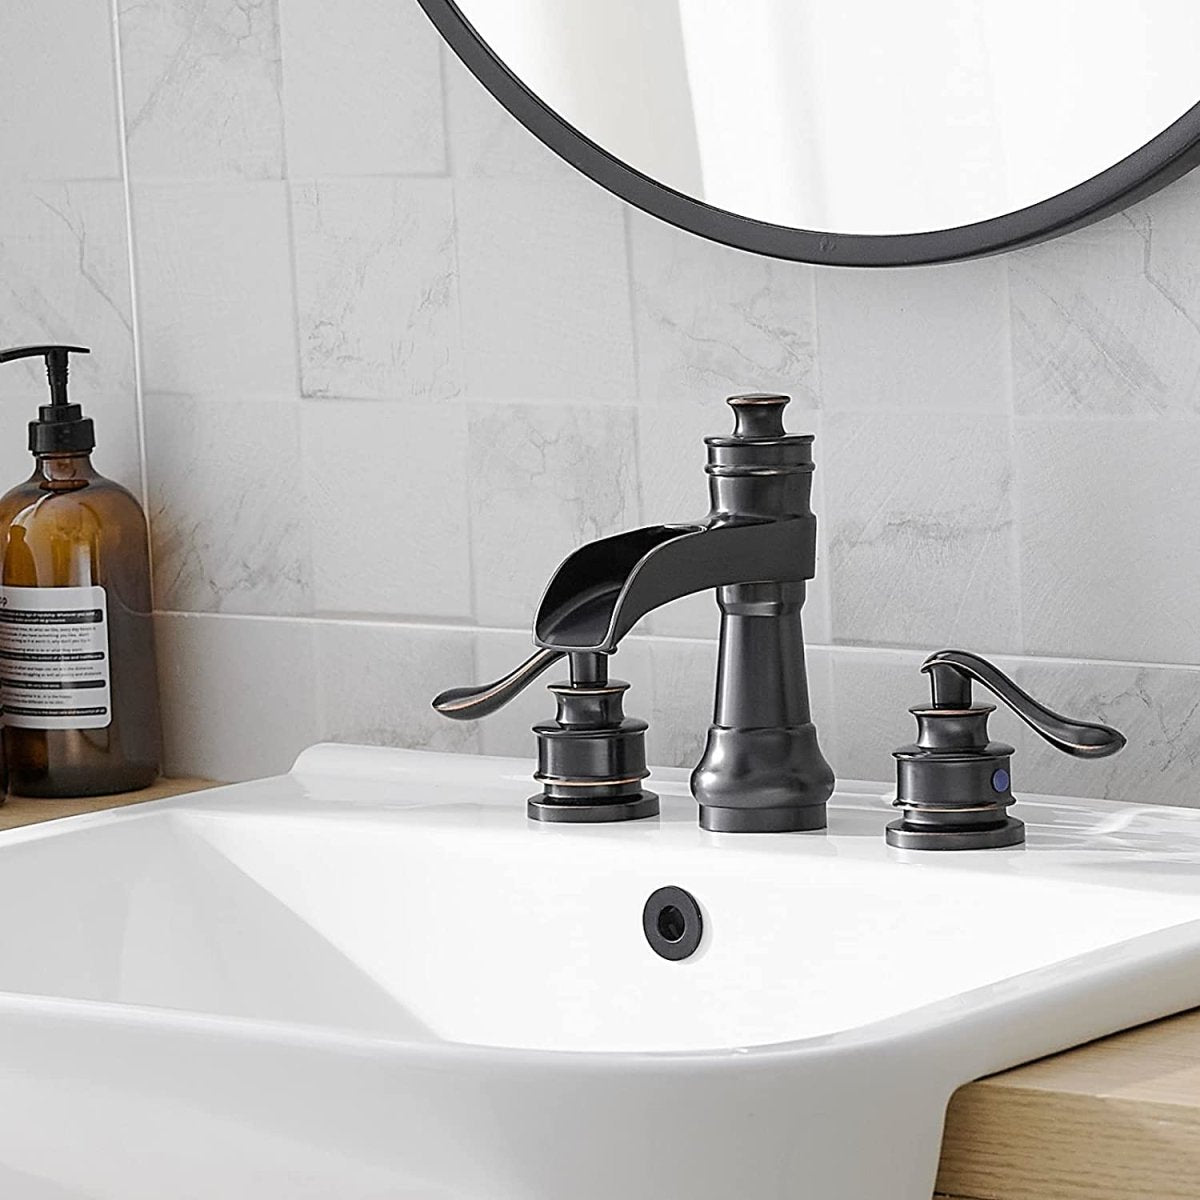 8 in Waterfall 2-Handle Bathroom Faucet Oil Rubbed Bronze-1 - buyfaucet.com